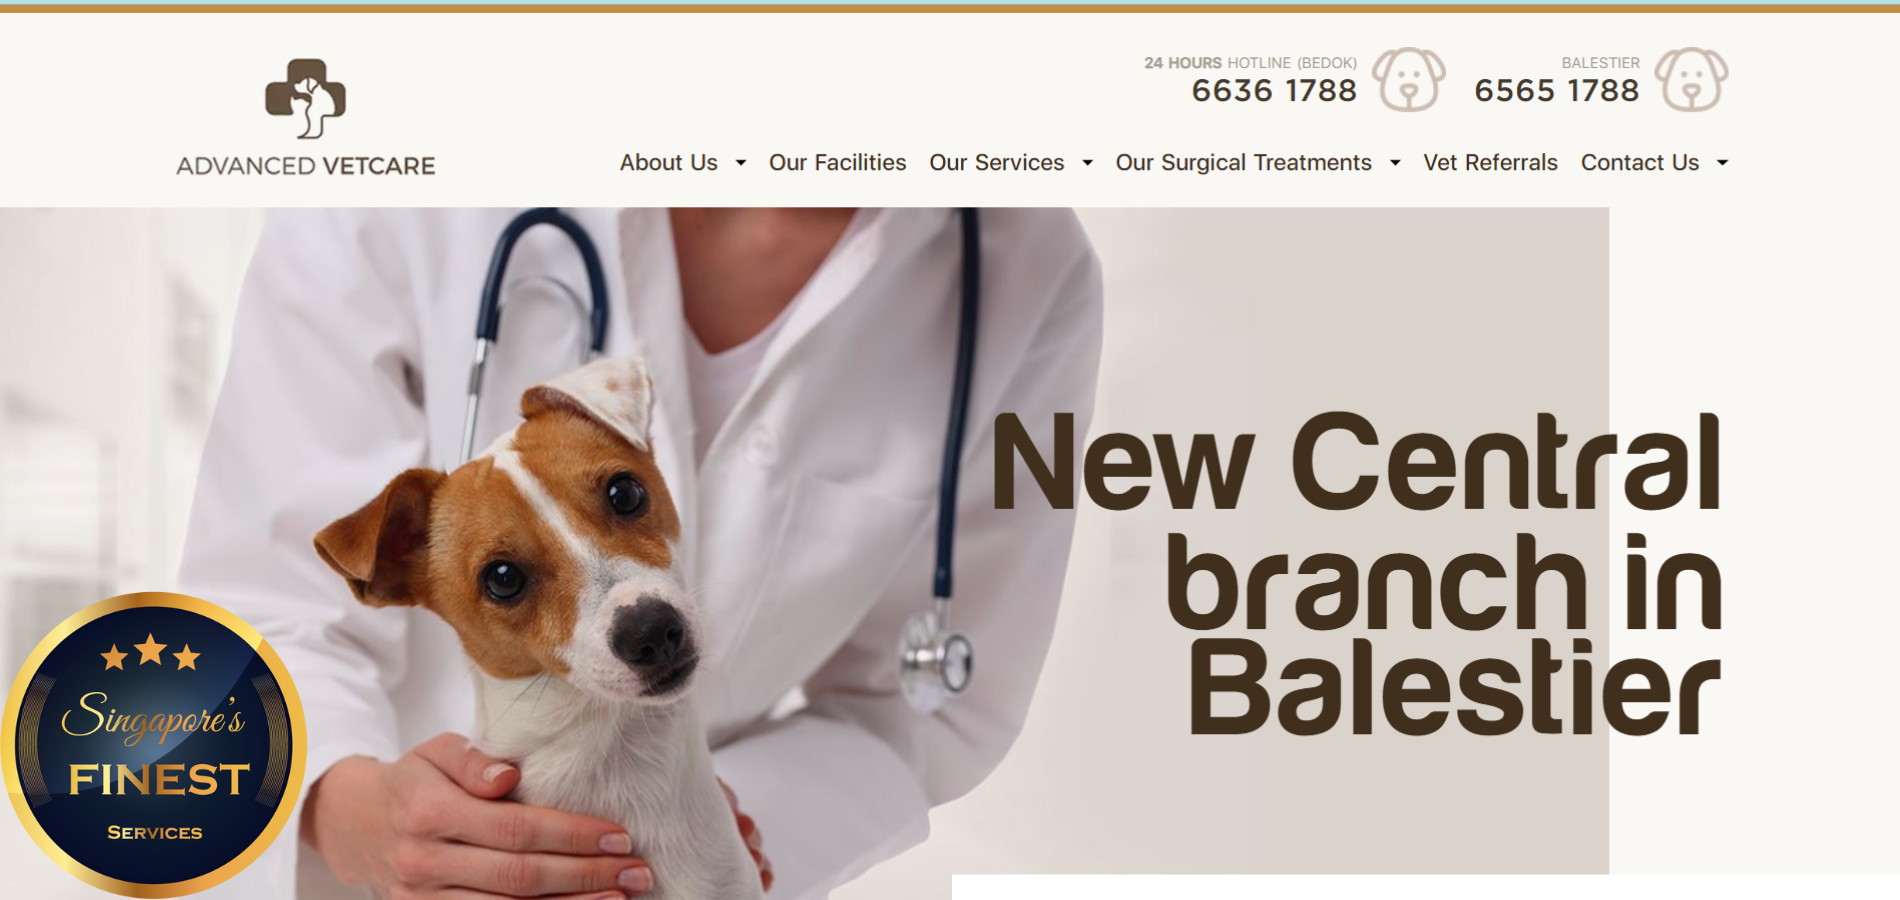 The Finest Vet Clinics in Singapore